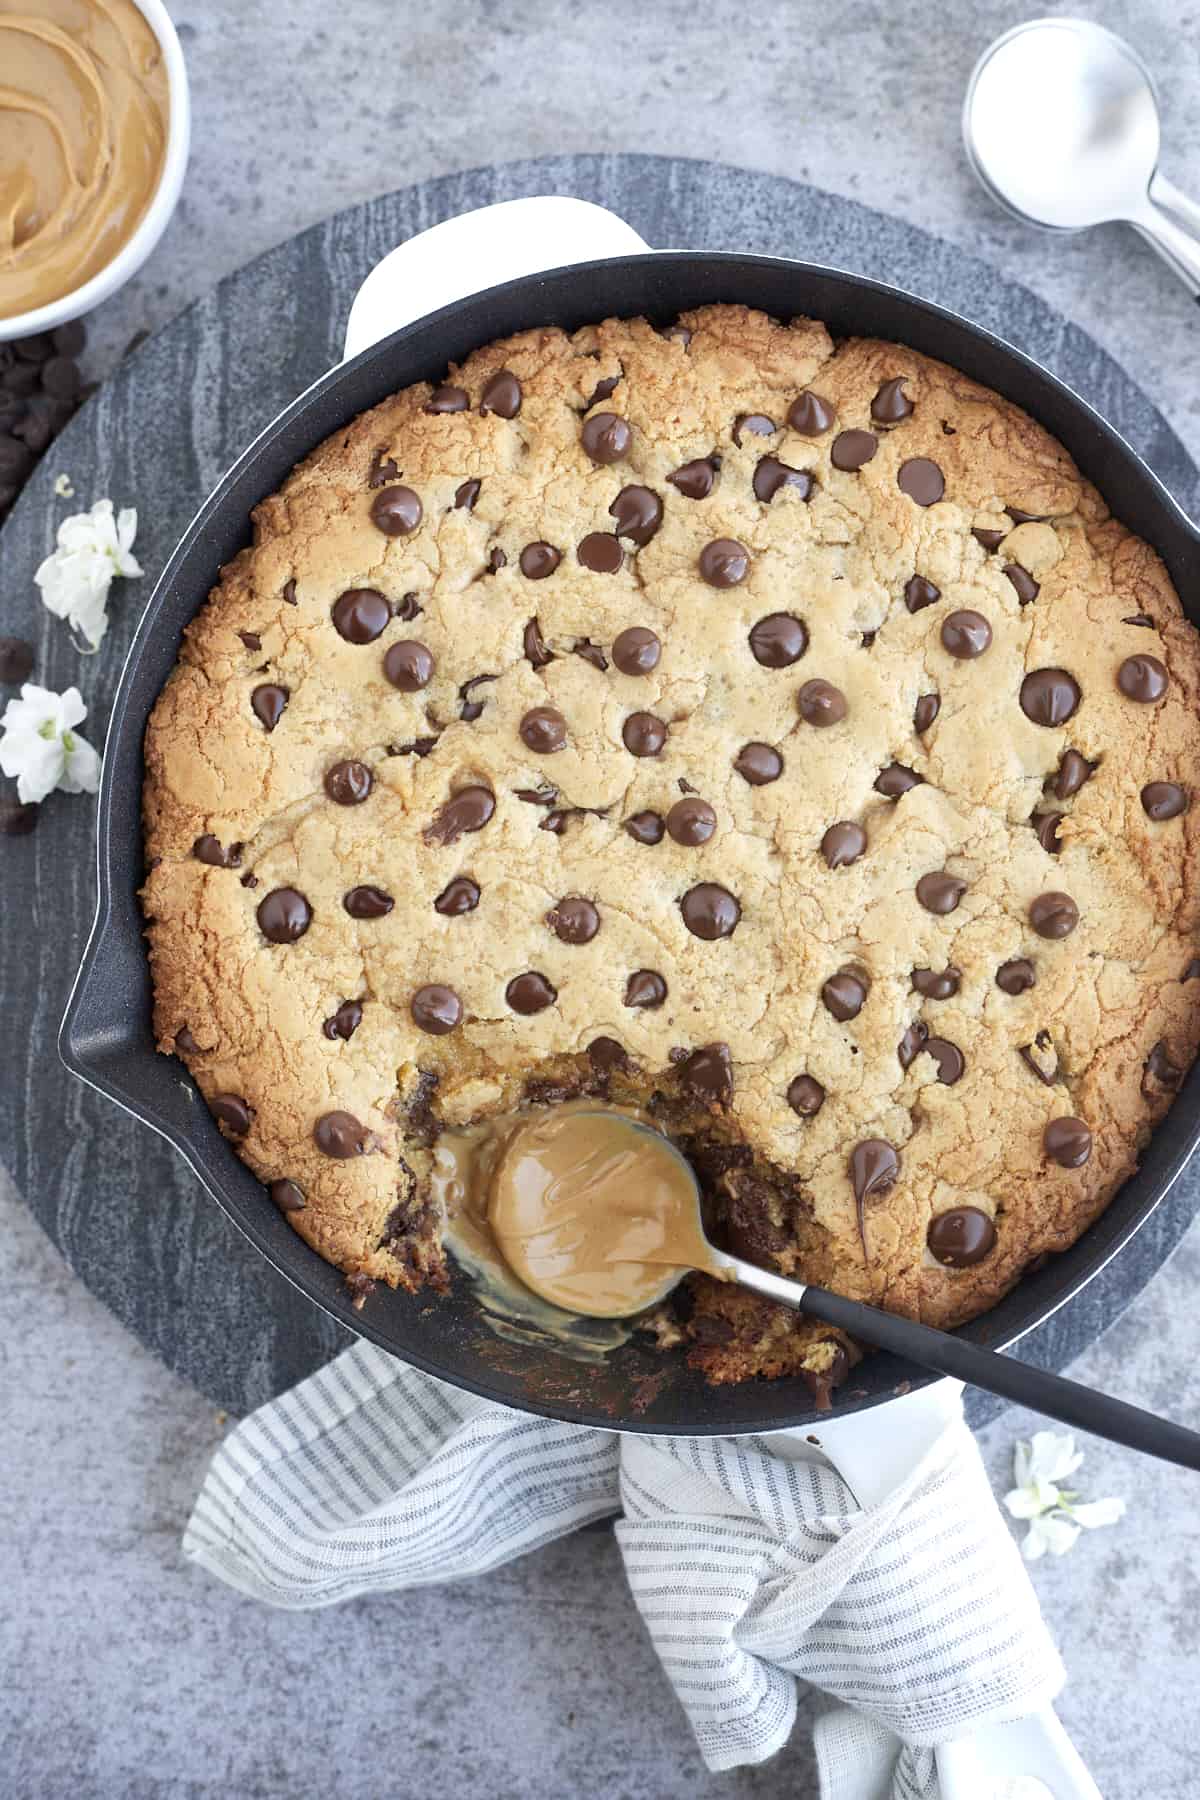 peanut butter chocolate chip cookie skillet with a bite missing and a spoon coated in peanut butter in its place